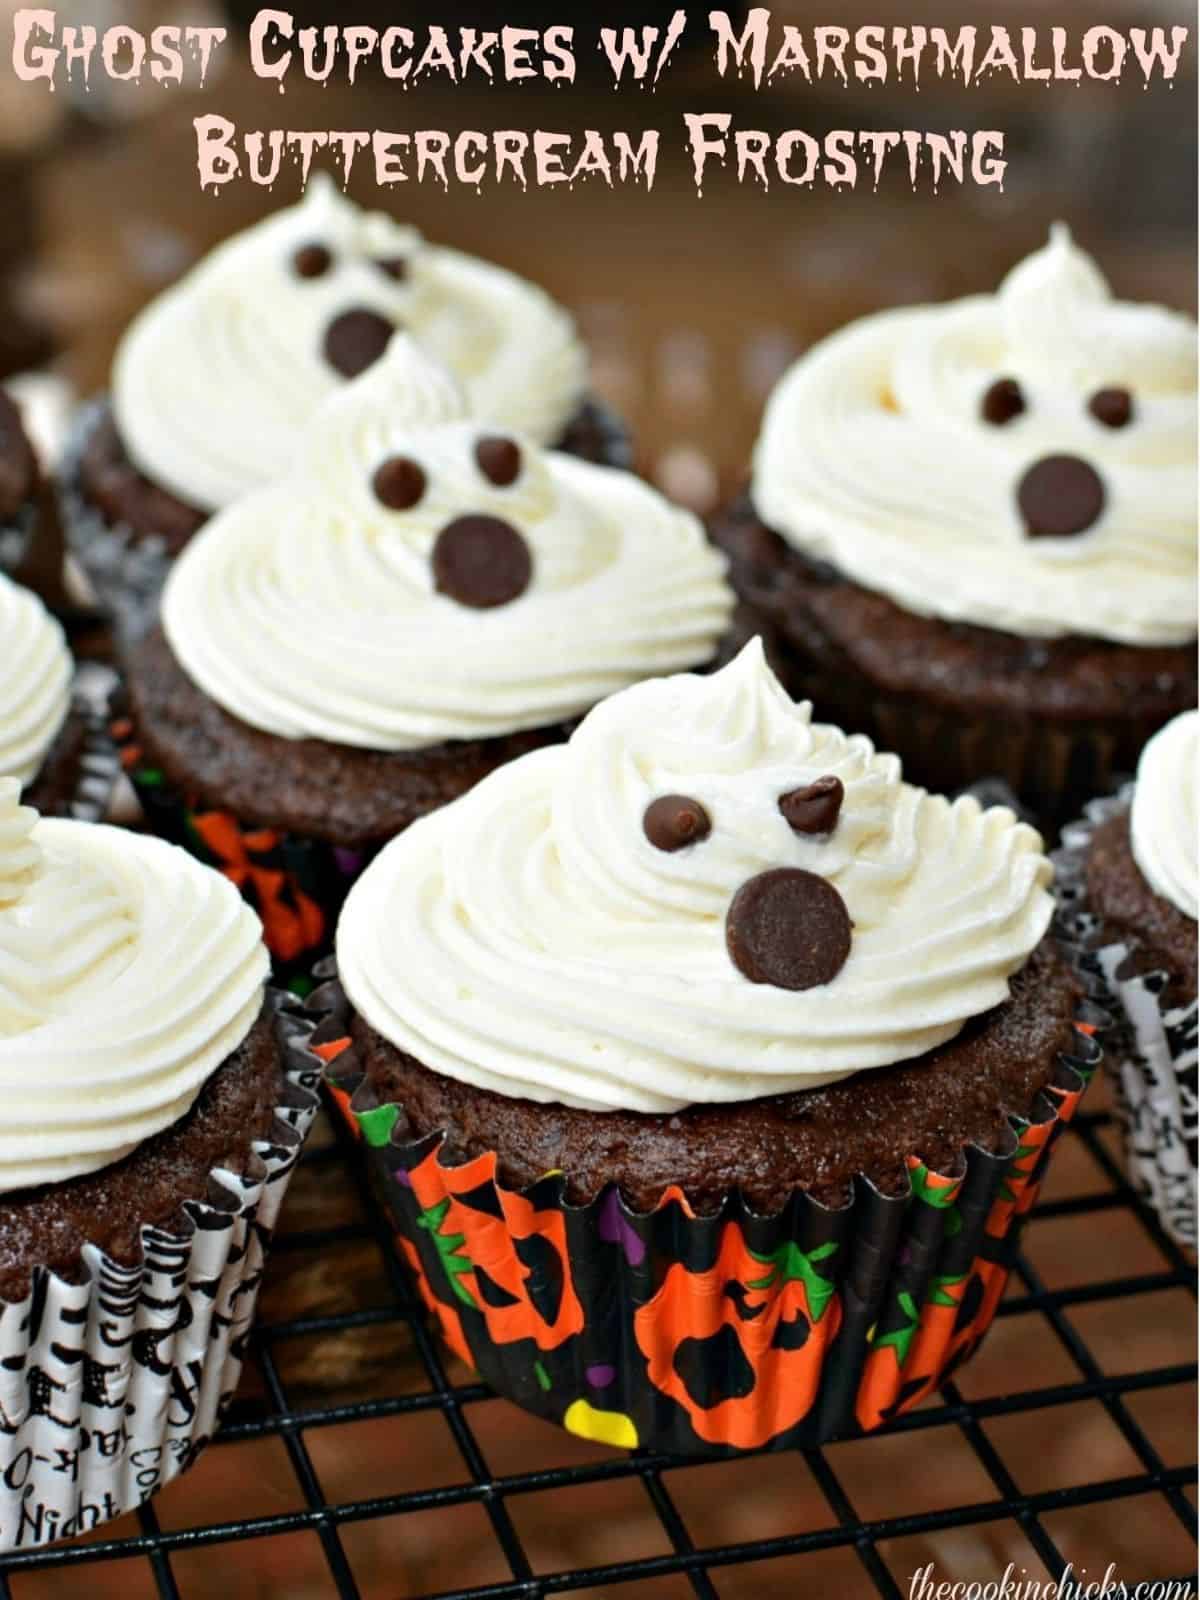 Ghost themed marshmallow cupcakes with buttercream frosting.